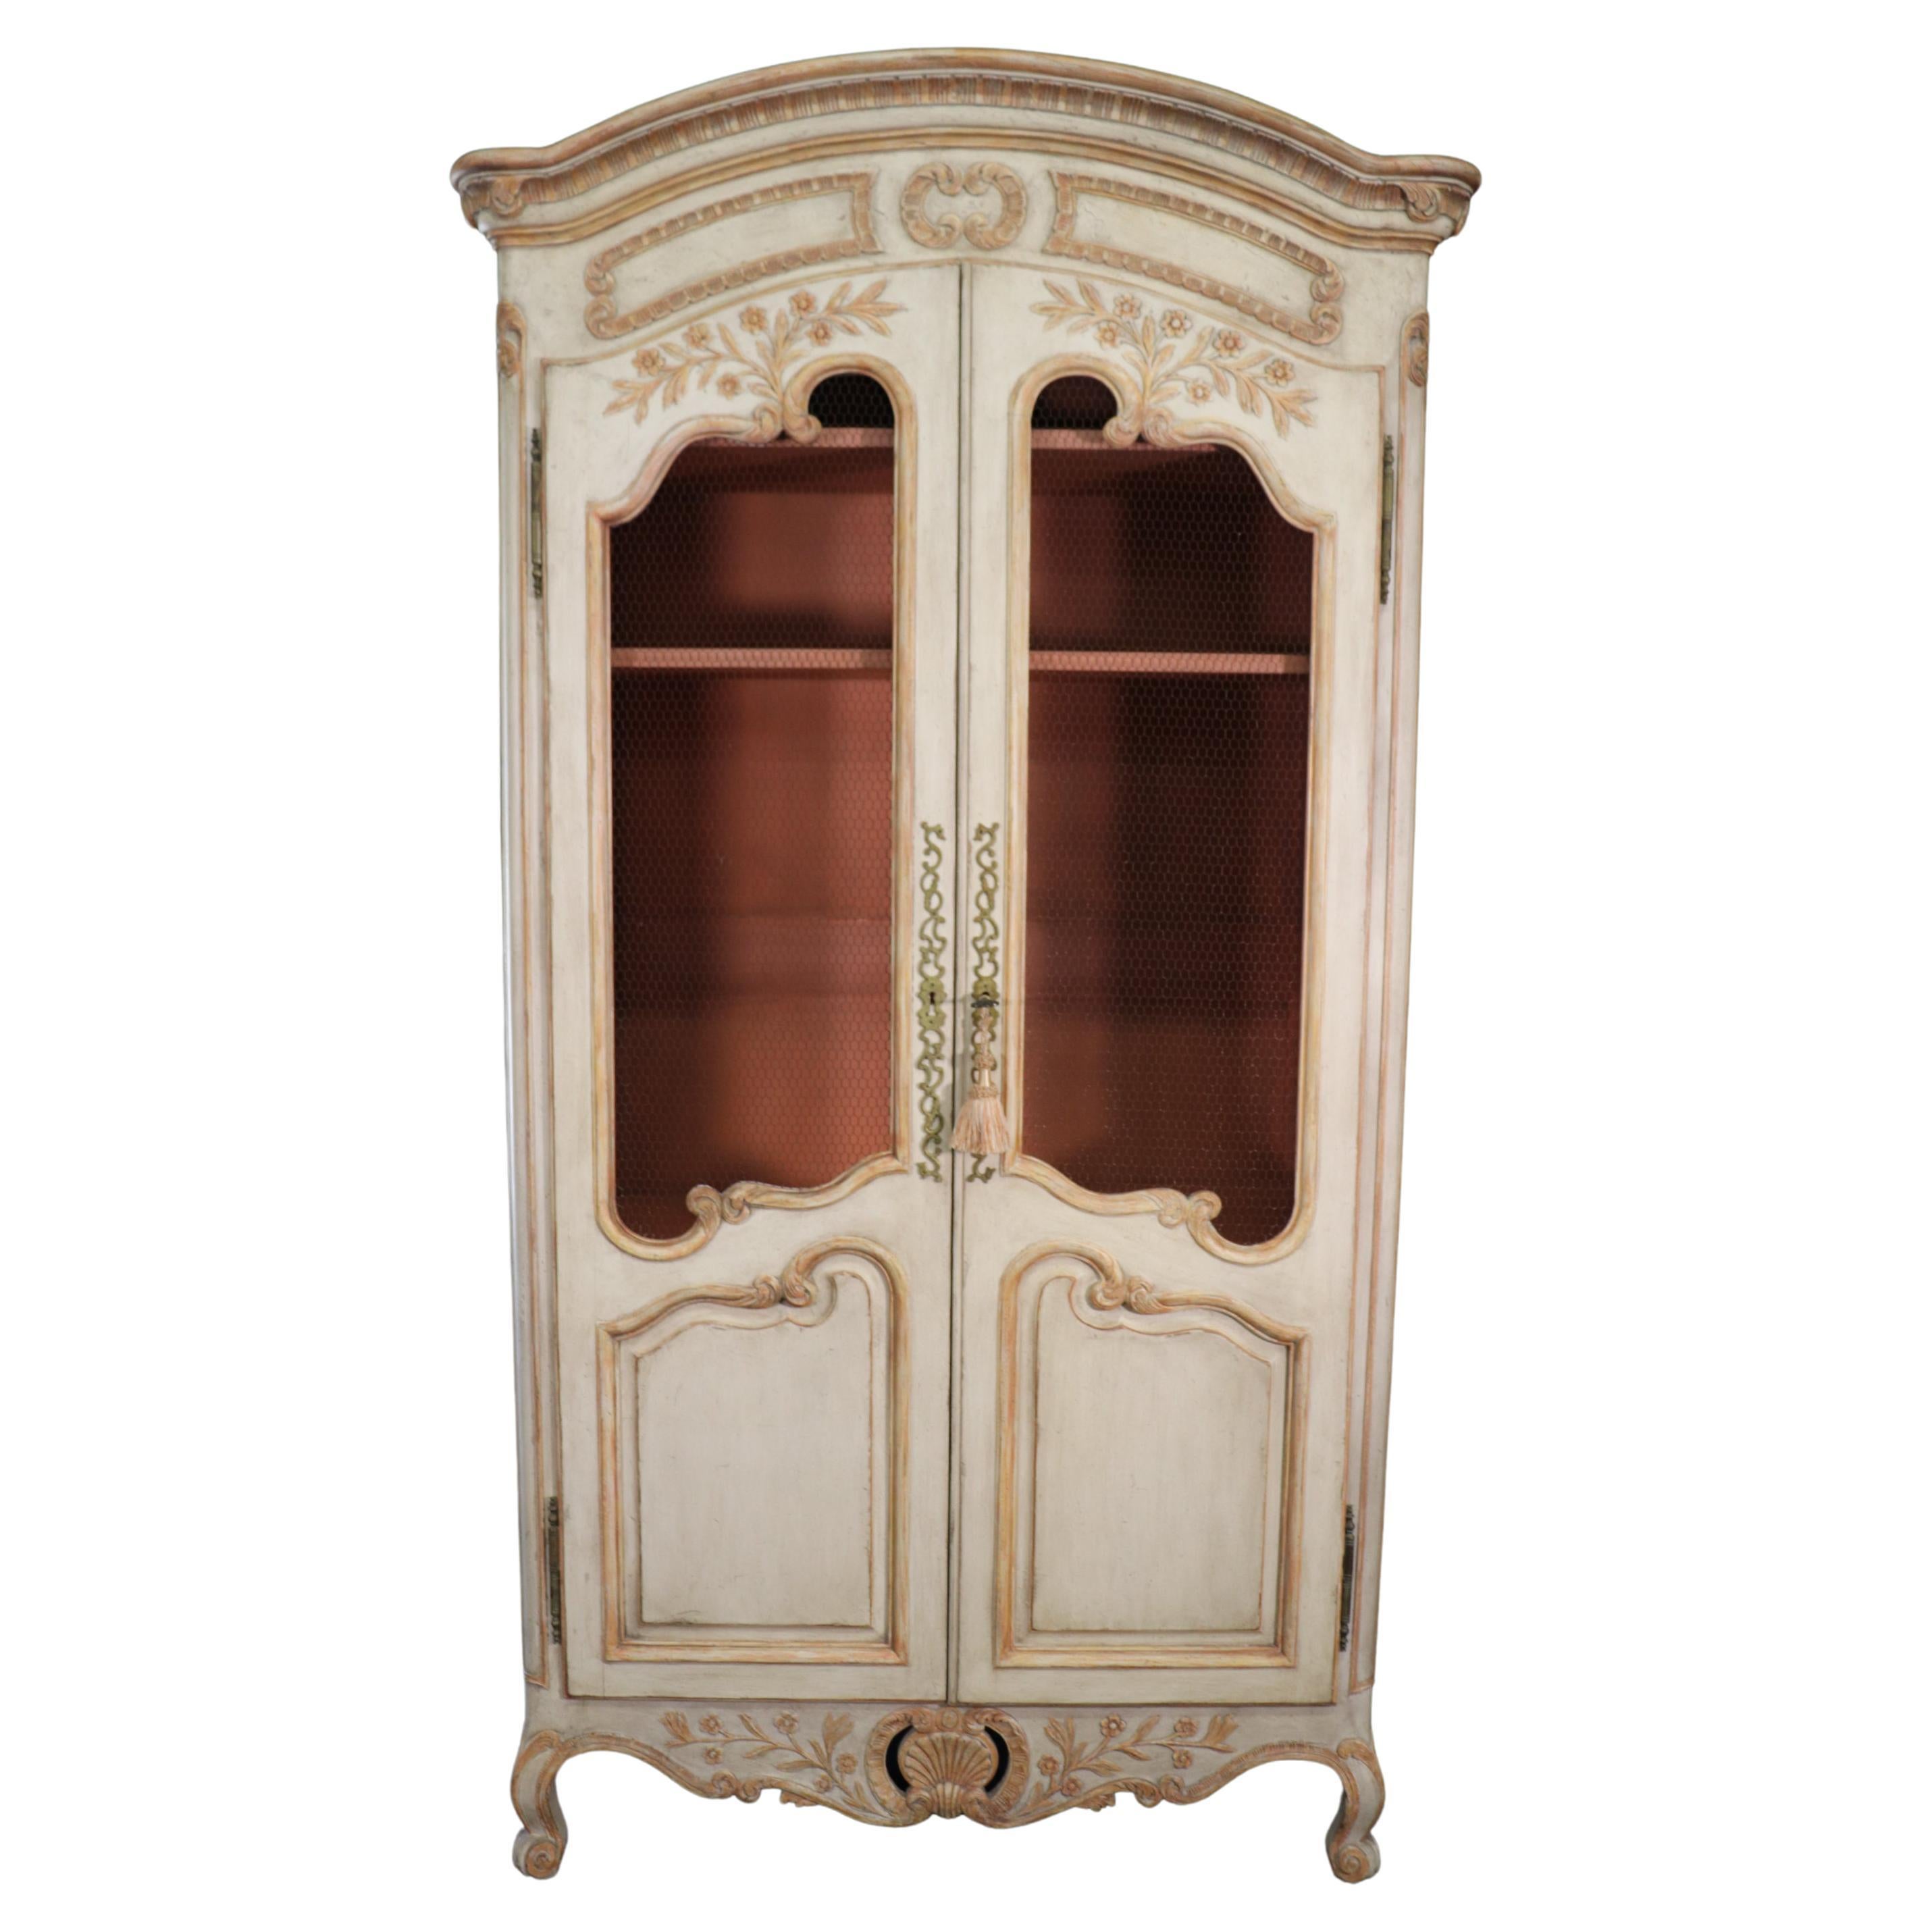 French Louis XV Country Style Painted Decorated Armoire Wardrobe circa 1950